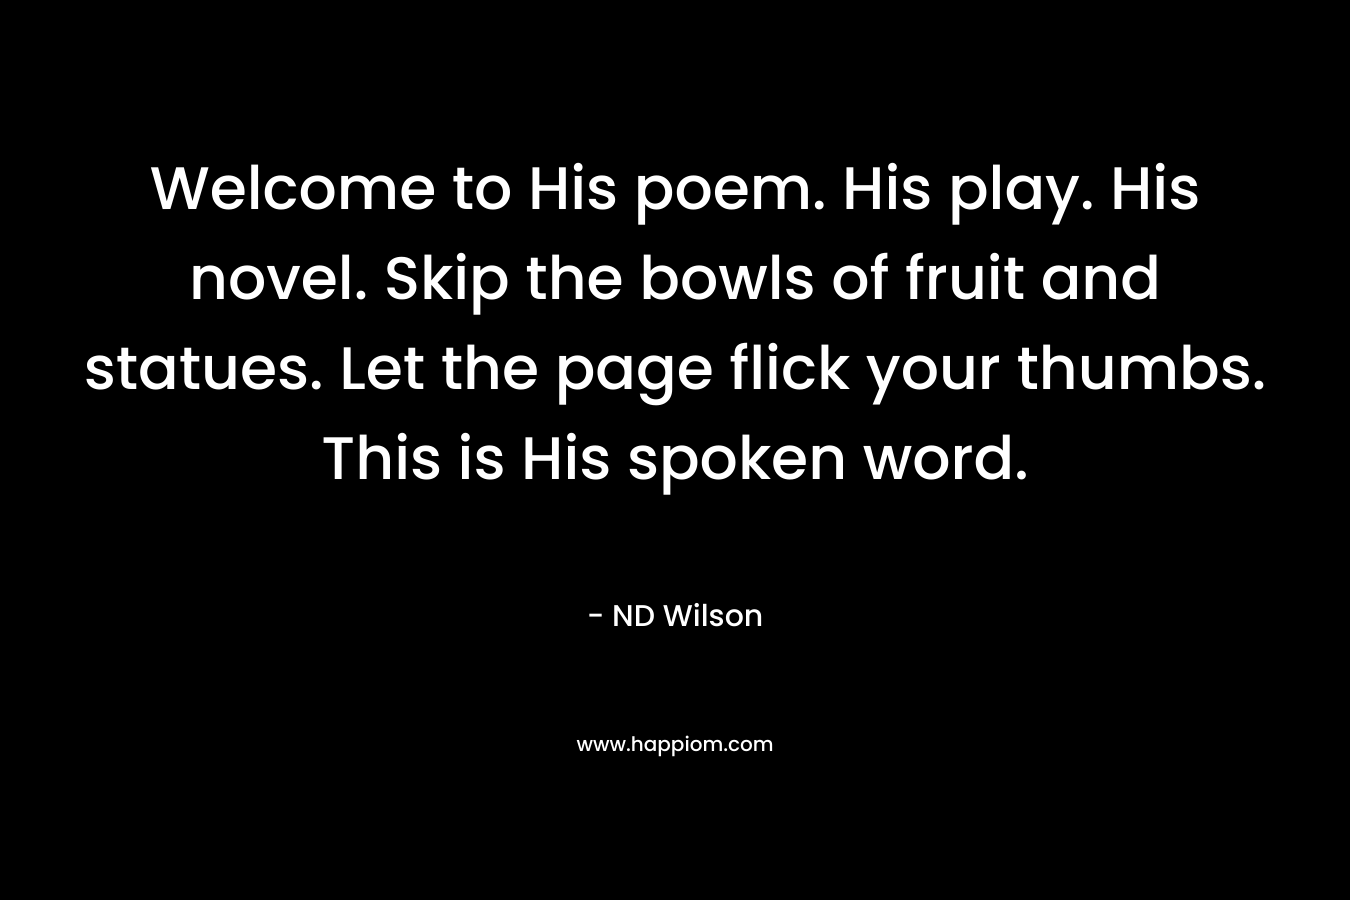 Welcome to His poem. His play. His novel. Skip the bowls of fruit and statues. Let the page flick your thumbs. This is His spoken word. – ND Wilson